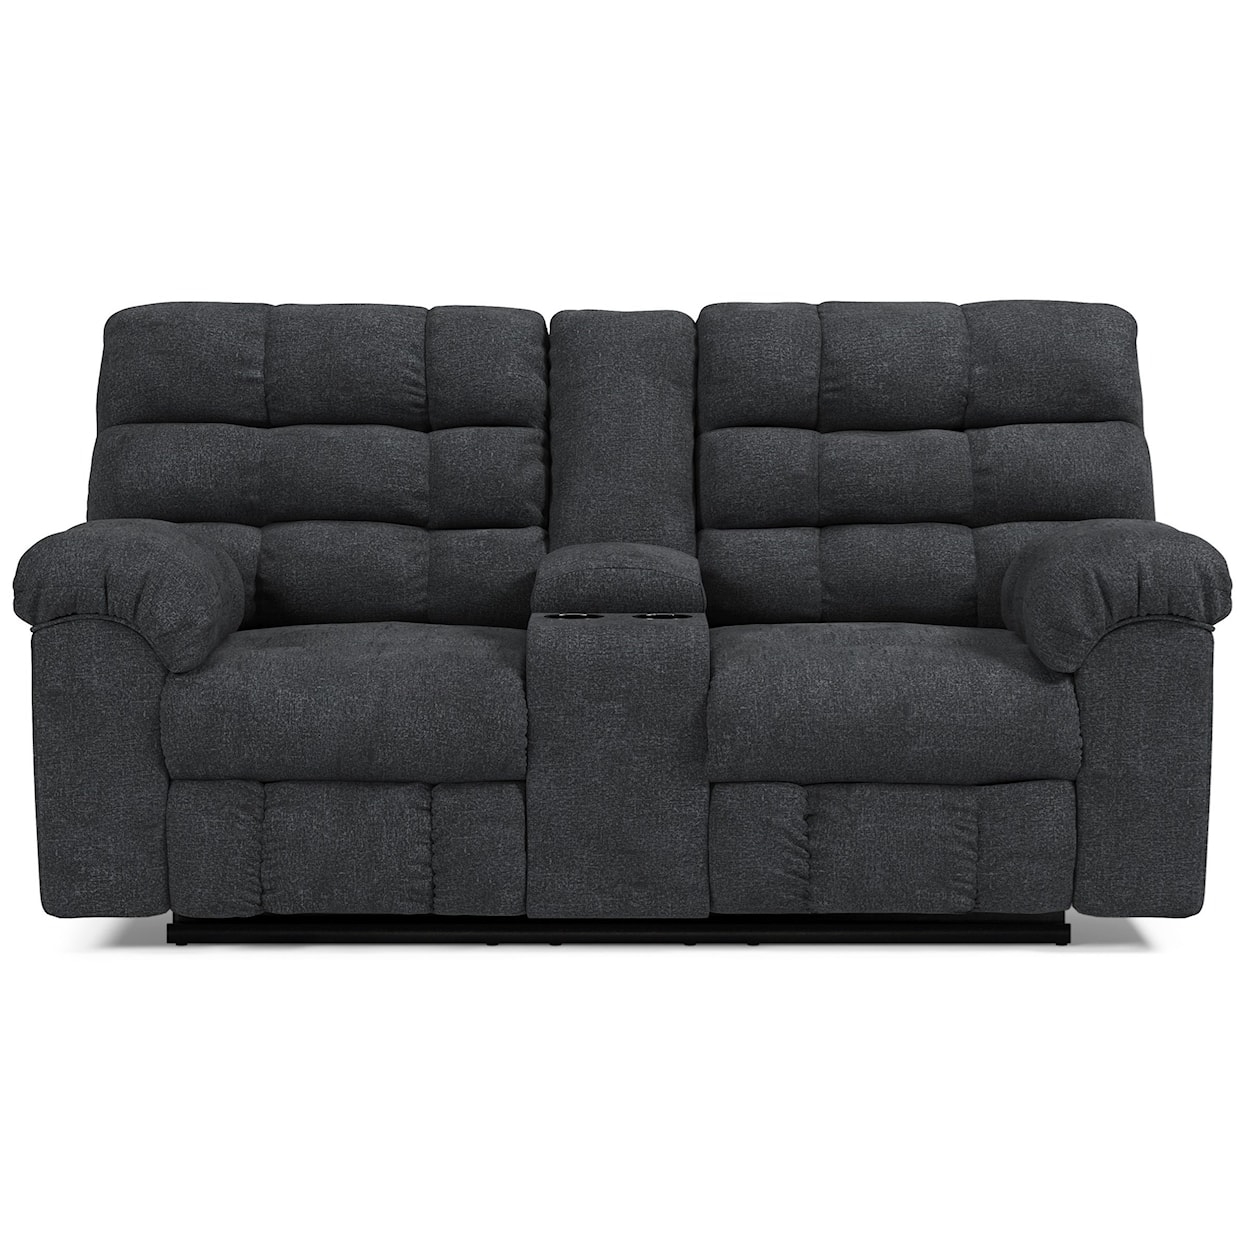 Signature Design by Ashley Wilhurst Double Reclining Loveseat w/ Console